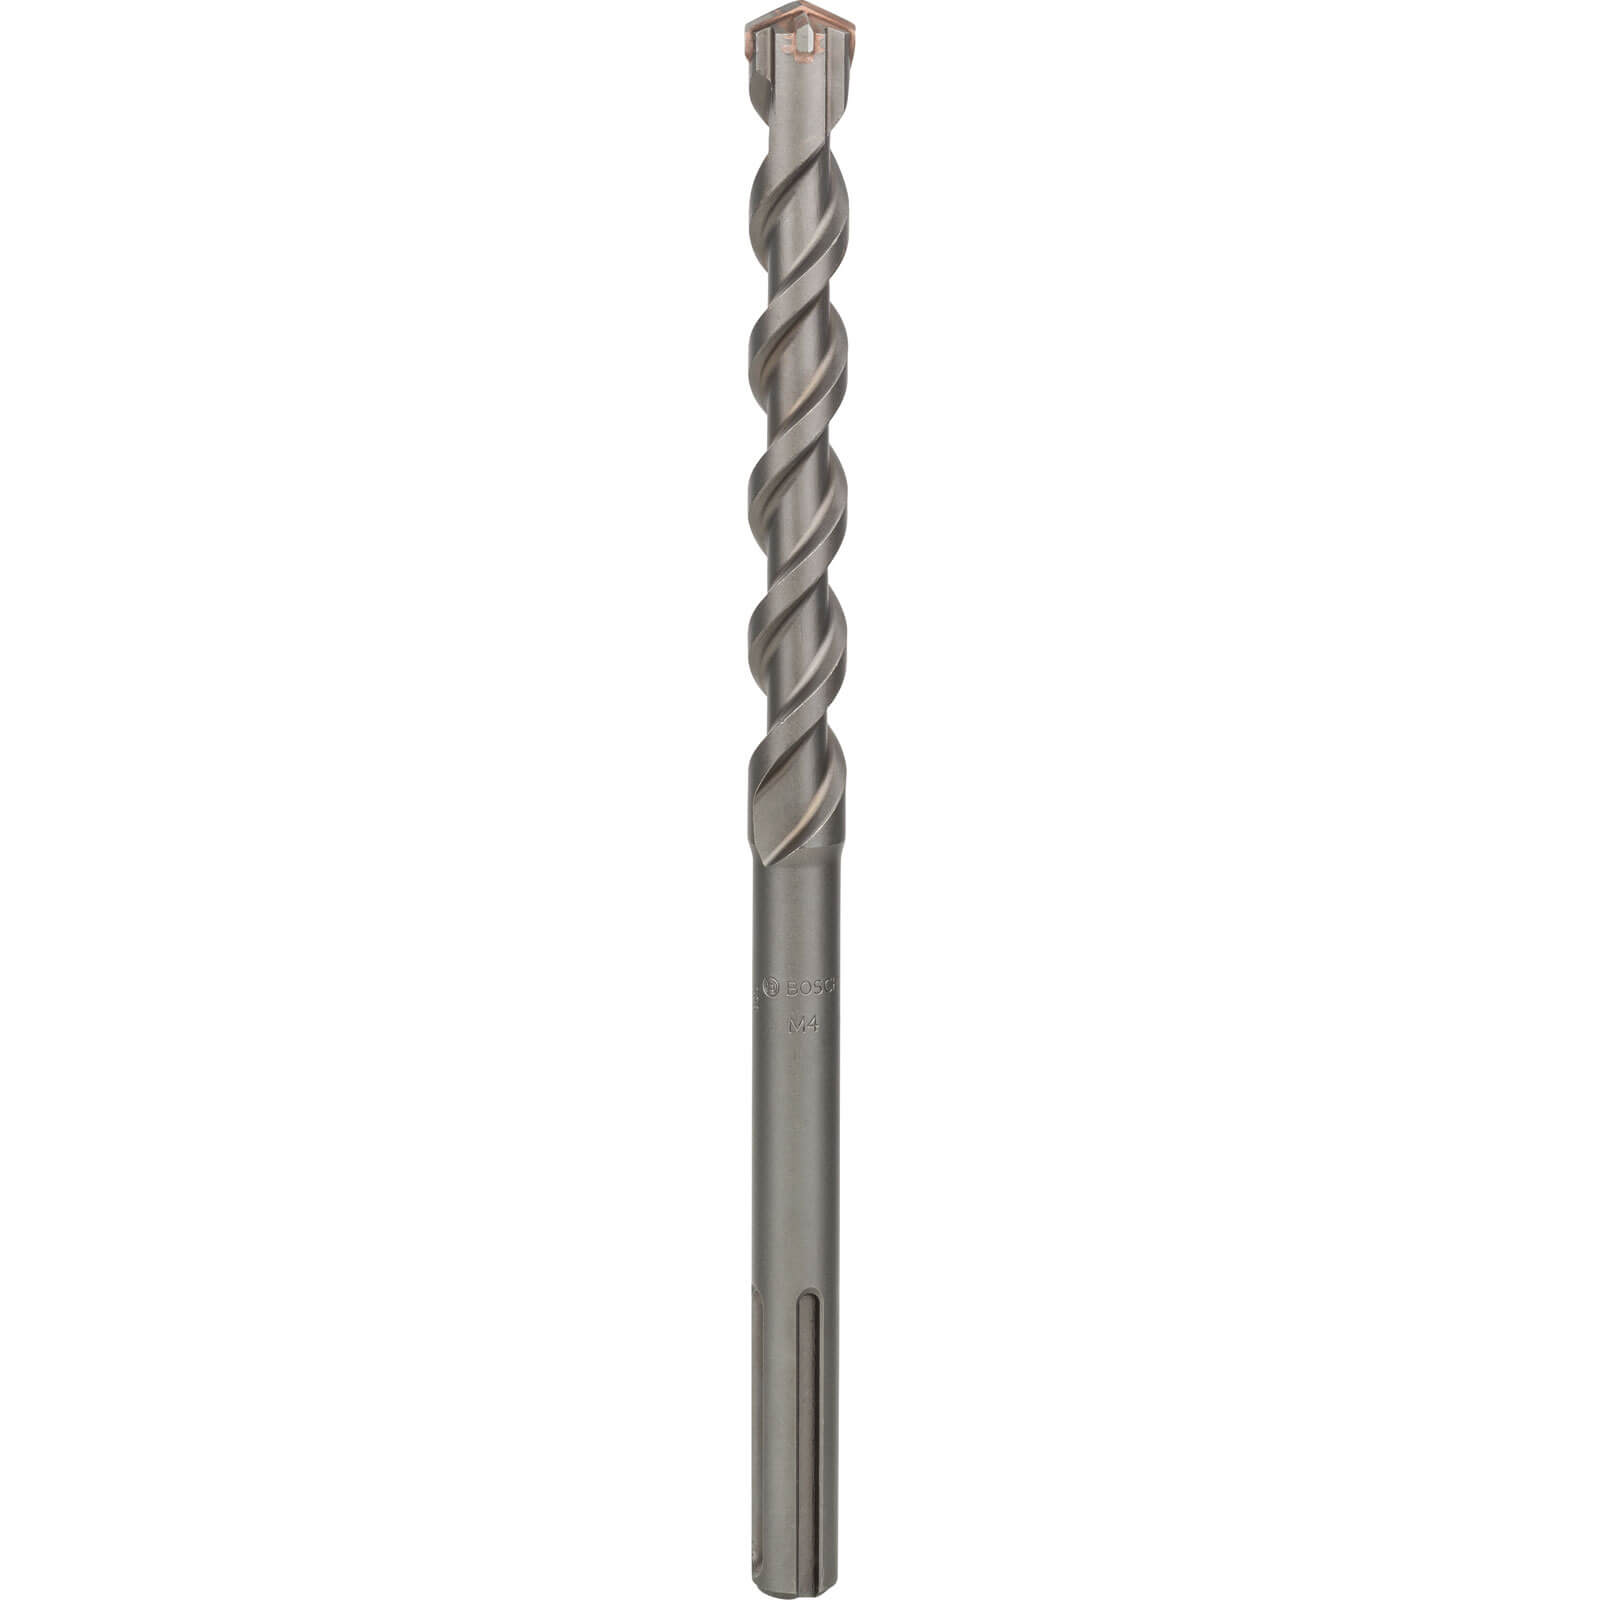 Image of Bosch M4 SDS Max Masonry Drill Bit 22mm 320mm Pack of 1